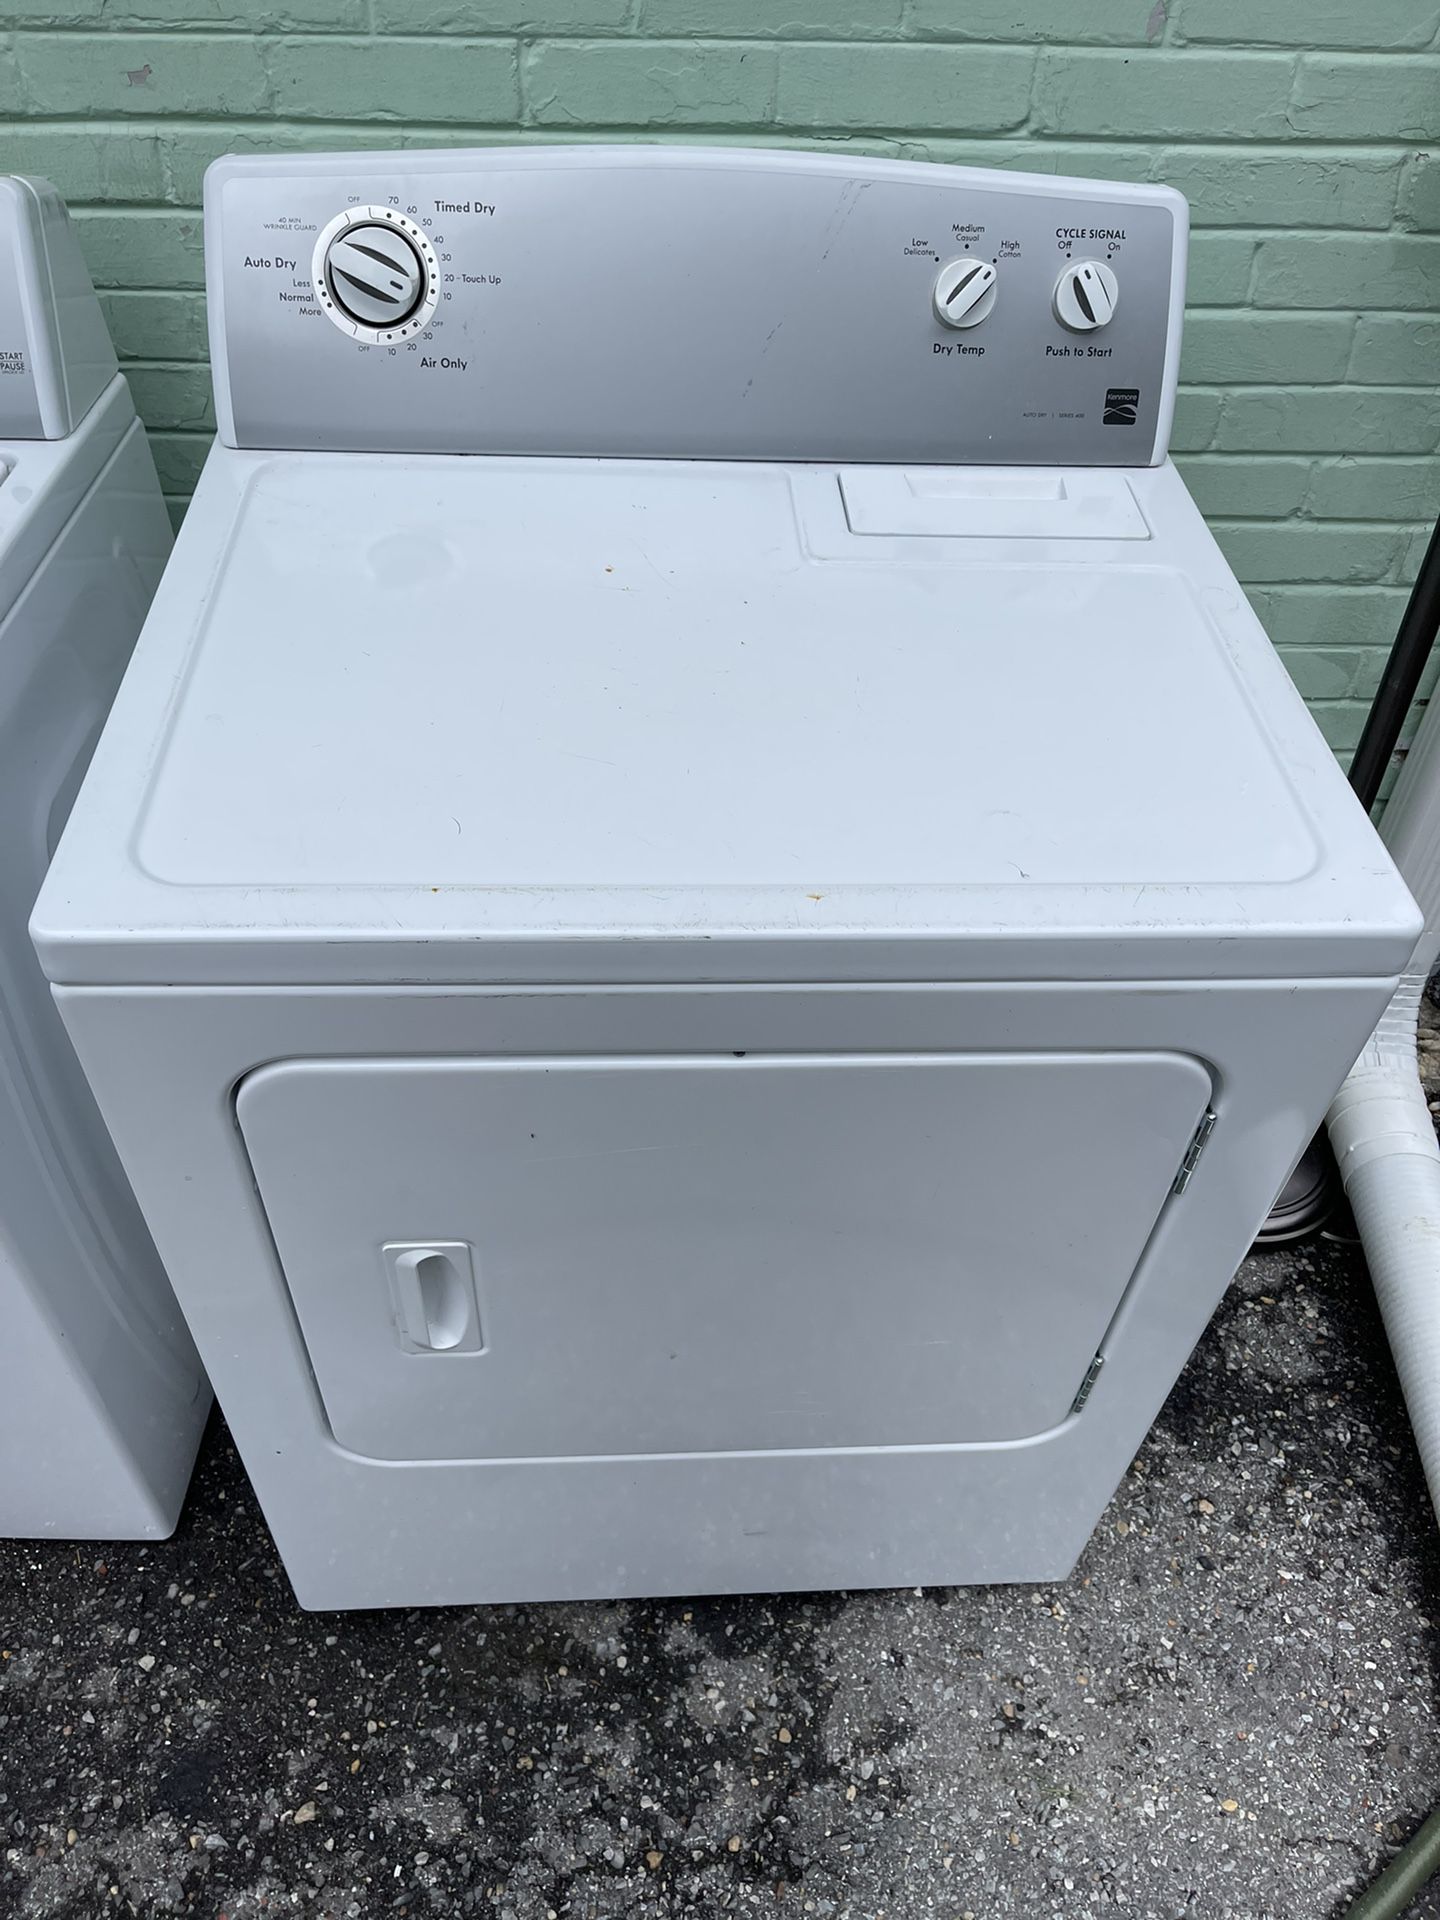 Kenmore washer and dryer Set